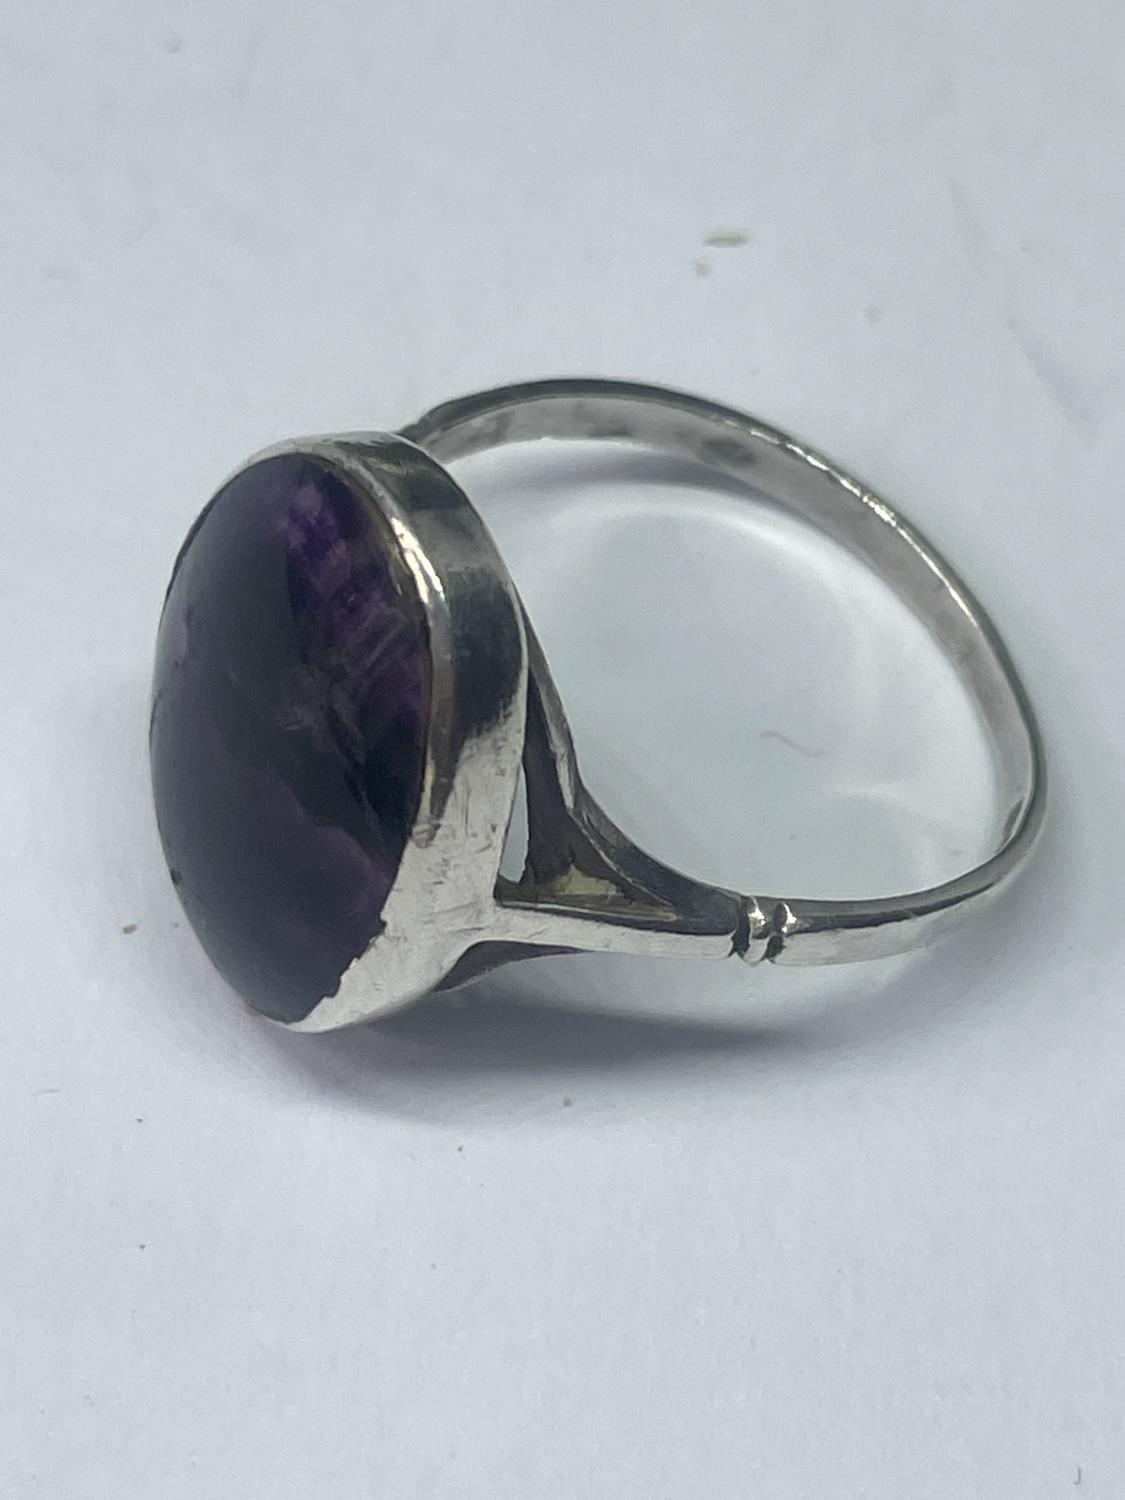 A SILVER RING WITH AN OVAL BLUE JOHN STONE IN A PRESENTATION BOX - Image 3 of 3